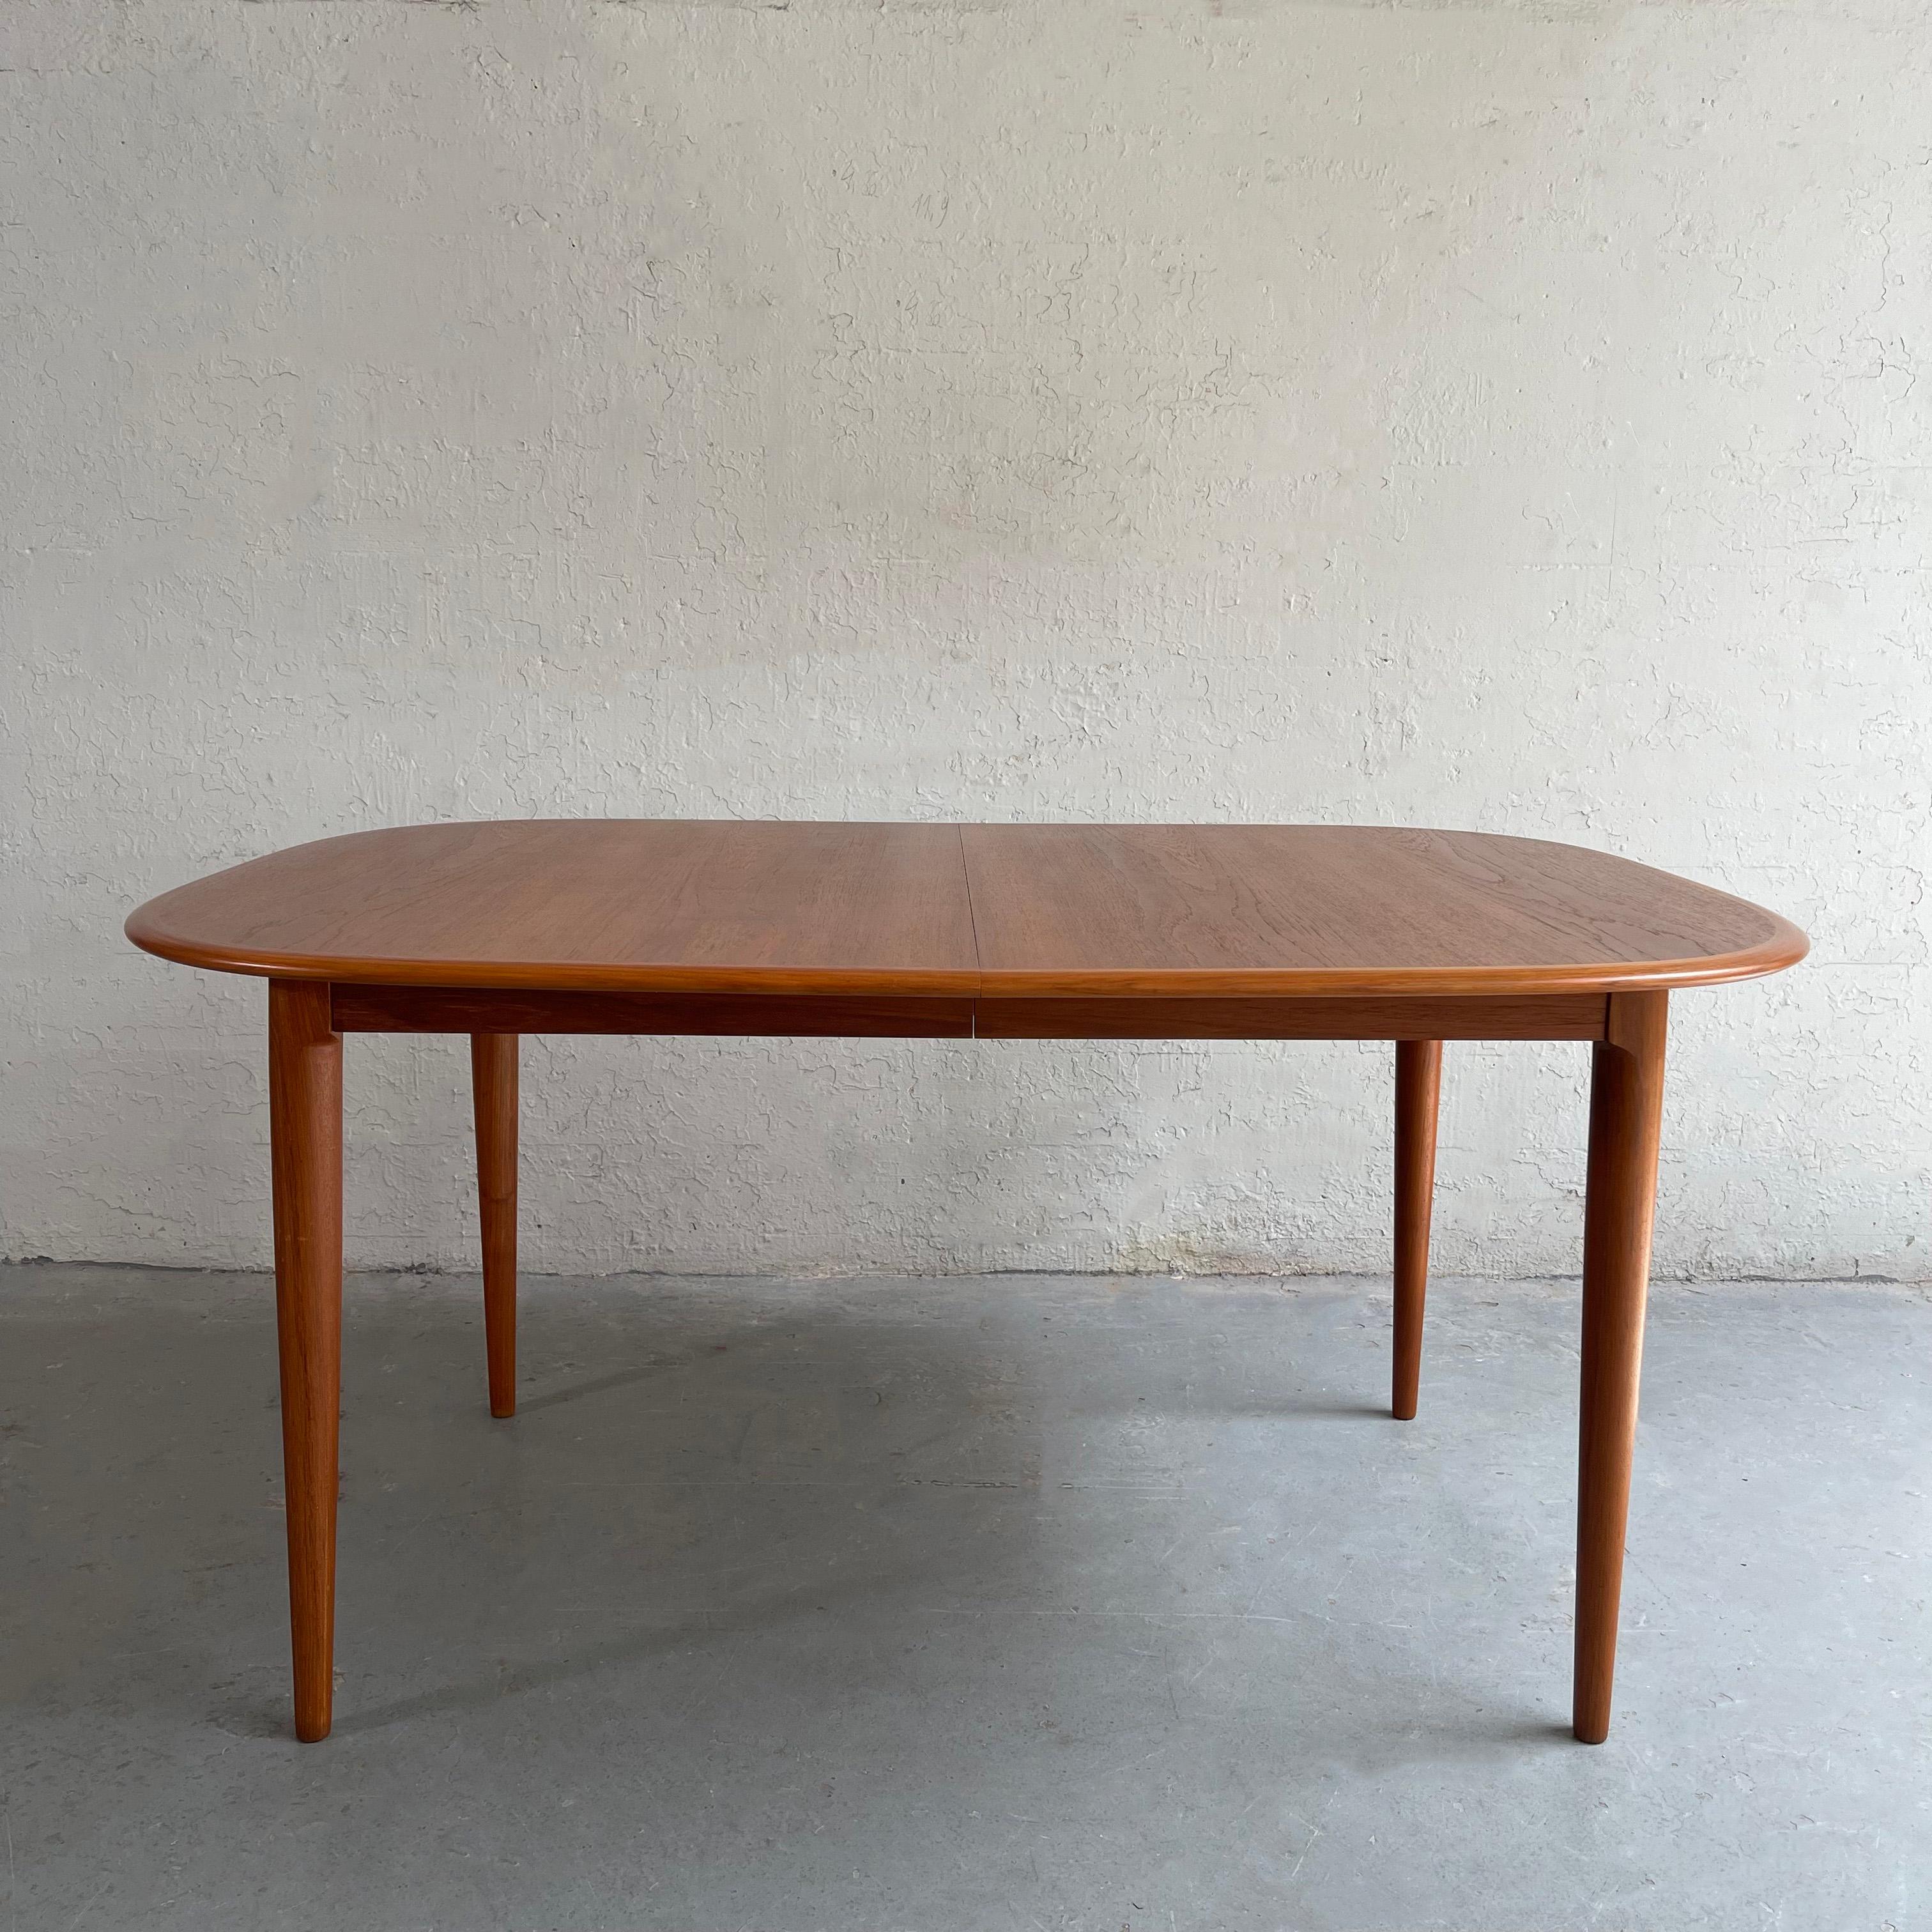 Scandinavian modern, teak dining table by Skovmand & Andersen for Moreddi features rounded edges with contrasting trim and elegant tapered legs. The table expands to 78.5 - 98 inches with two 19.5 inch leaves that are stored neatly underneath the